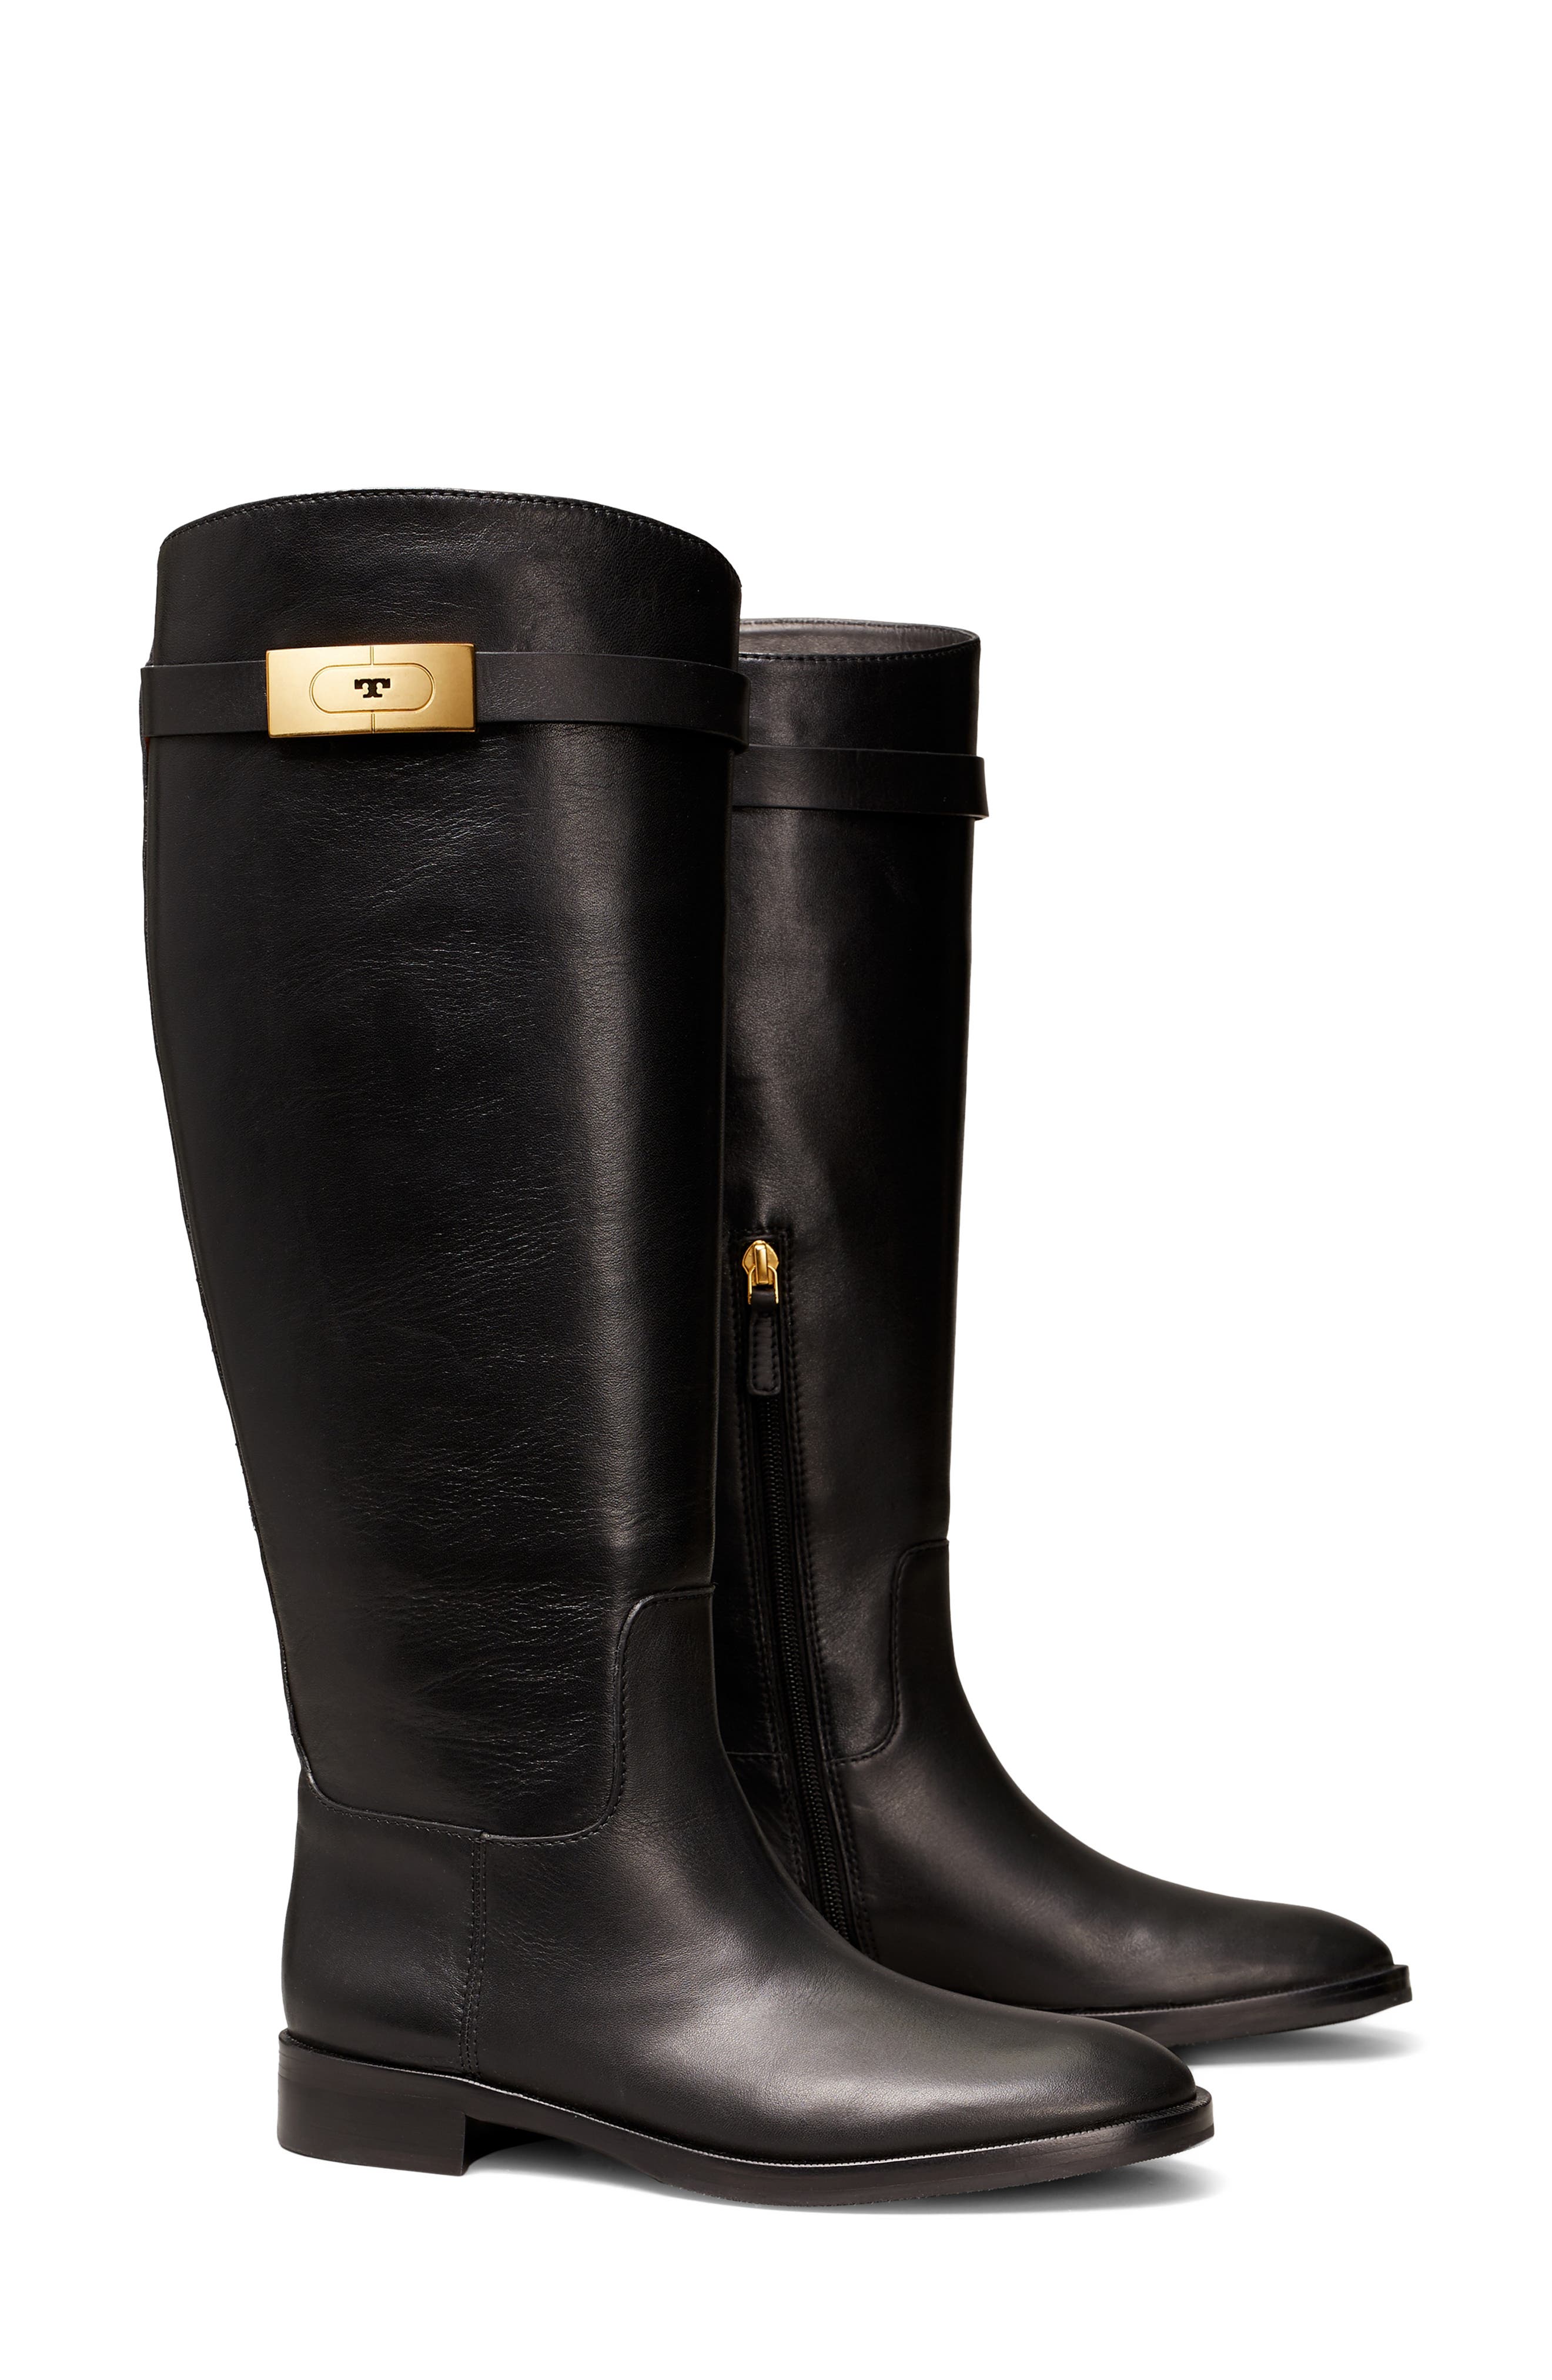 Tory Burch Boots Canada Sale, SAVE 50% 